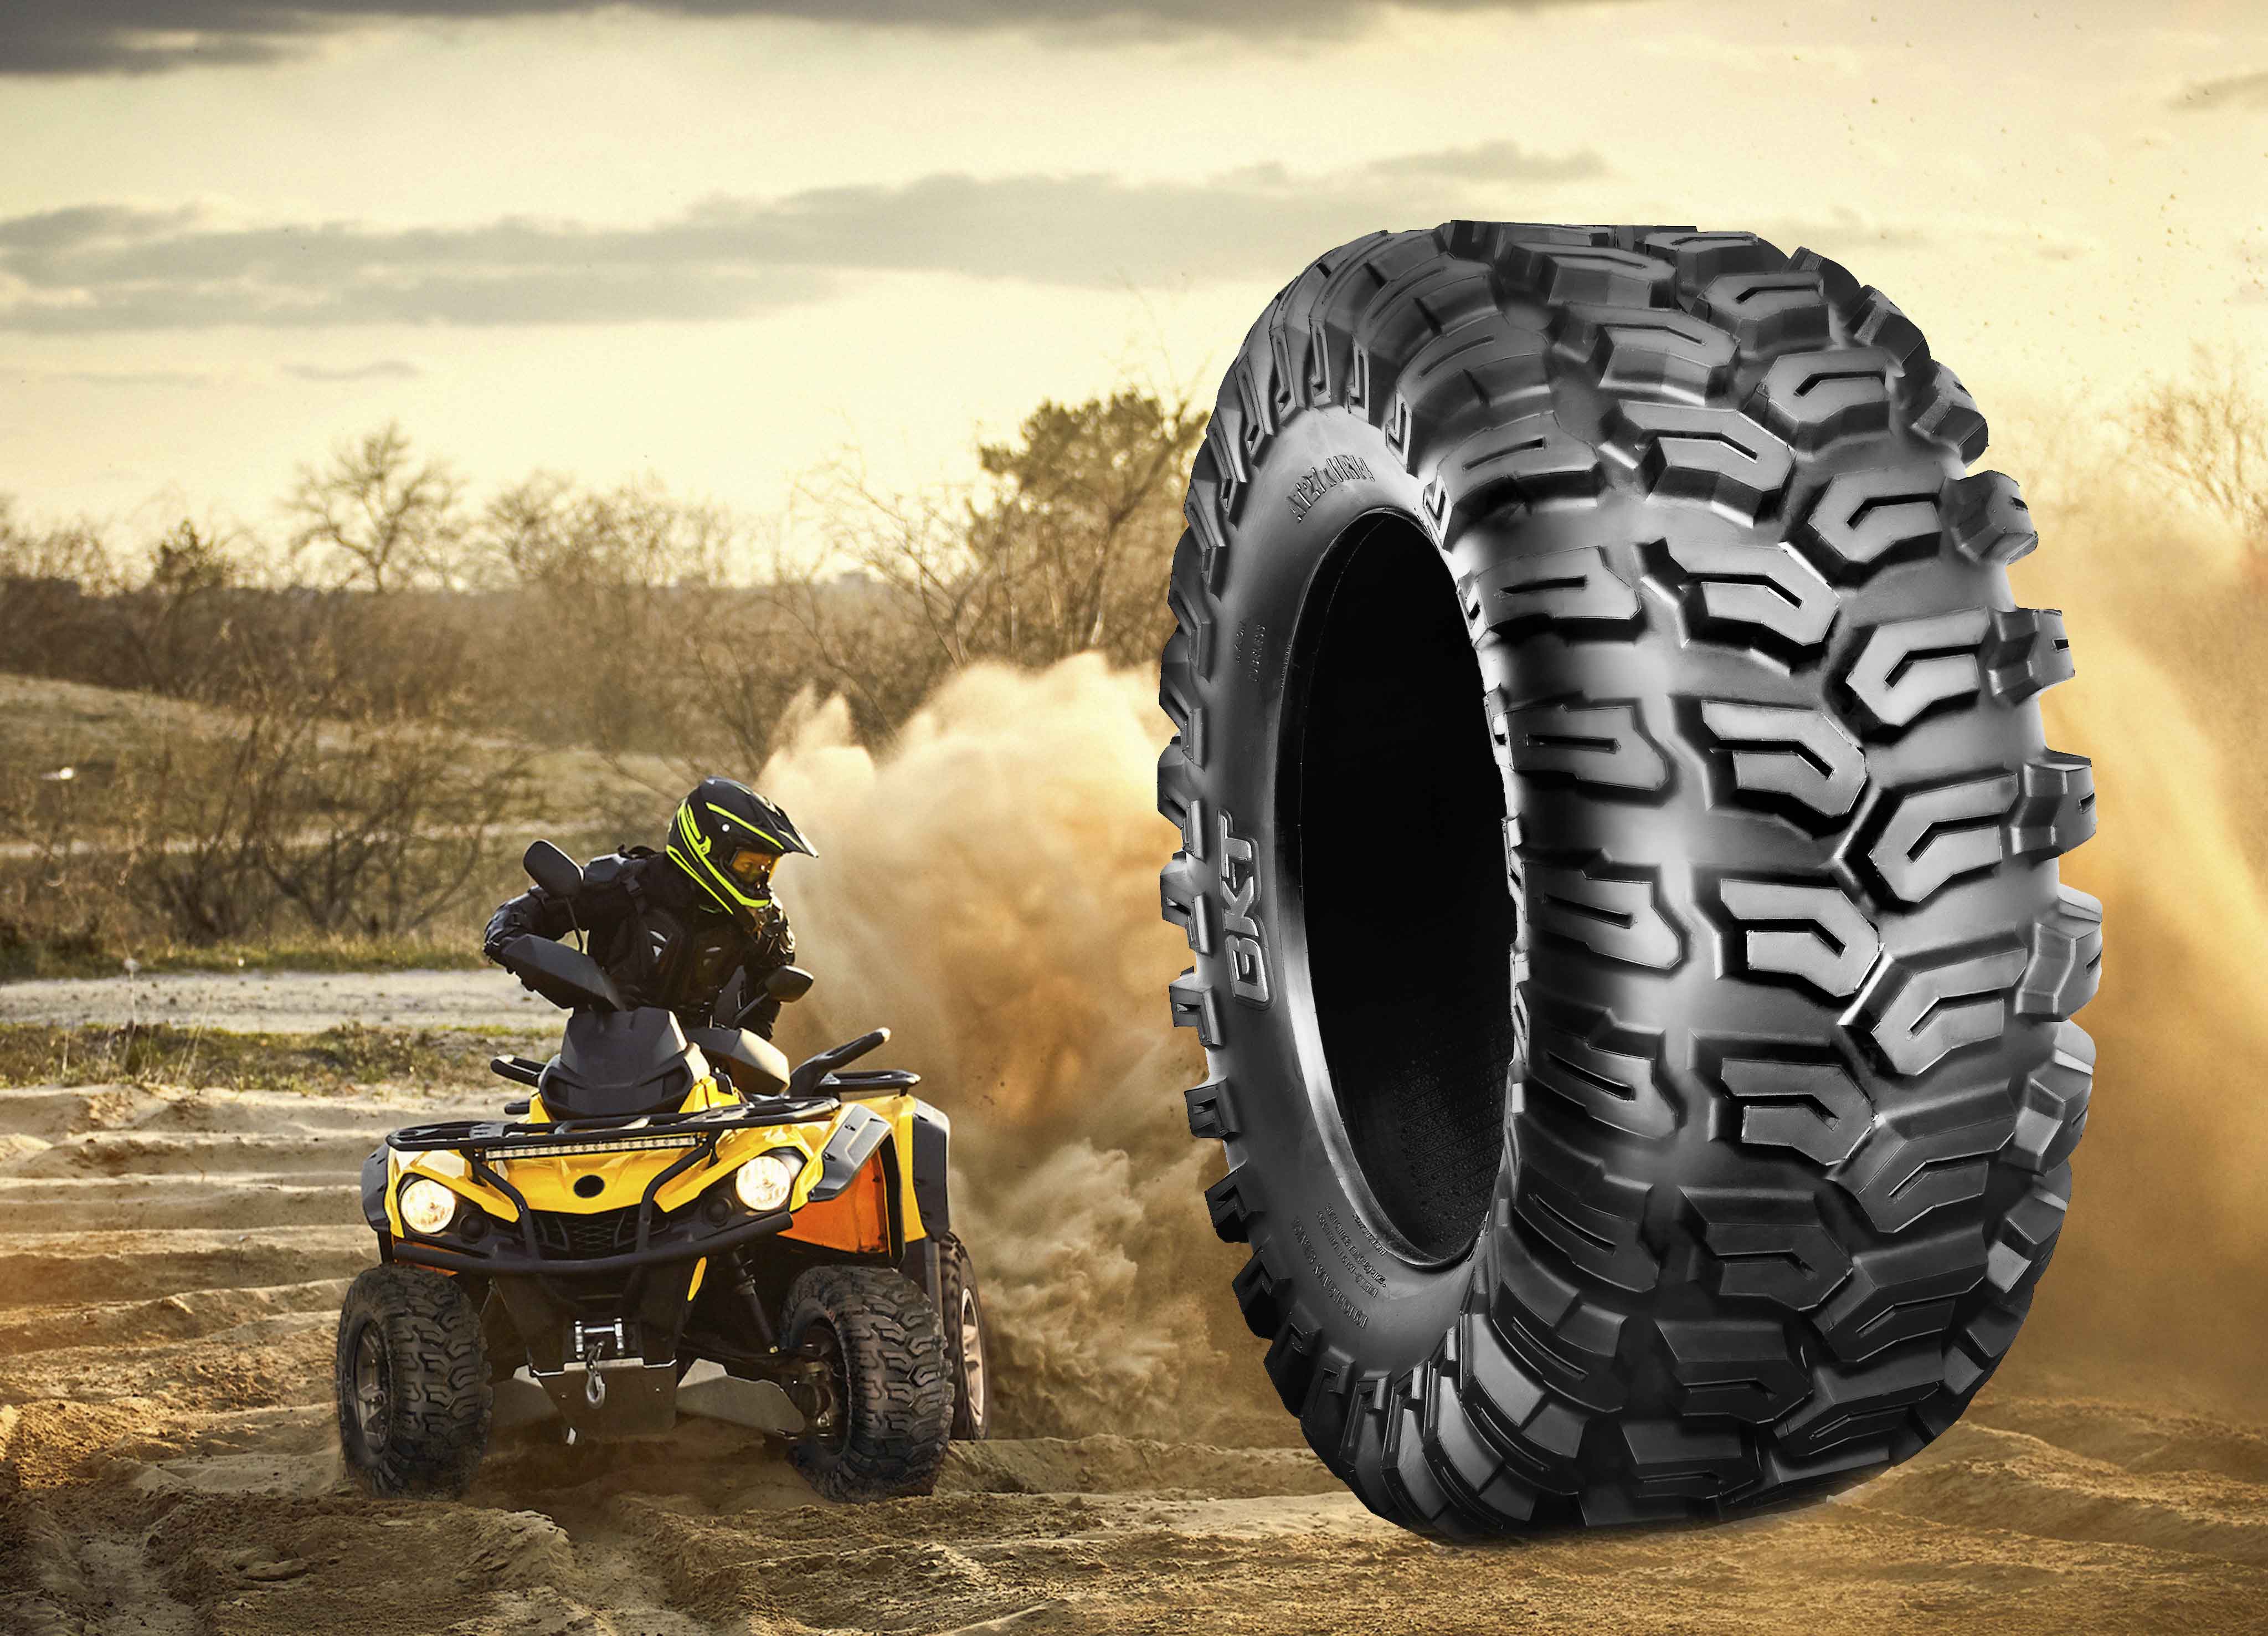 Sierra Max Pro Is Born, The New 'Made In Bkt' Tire - Tires & Parts News